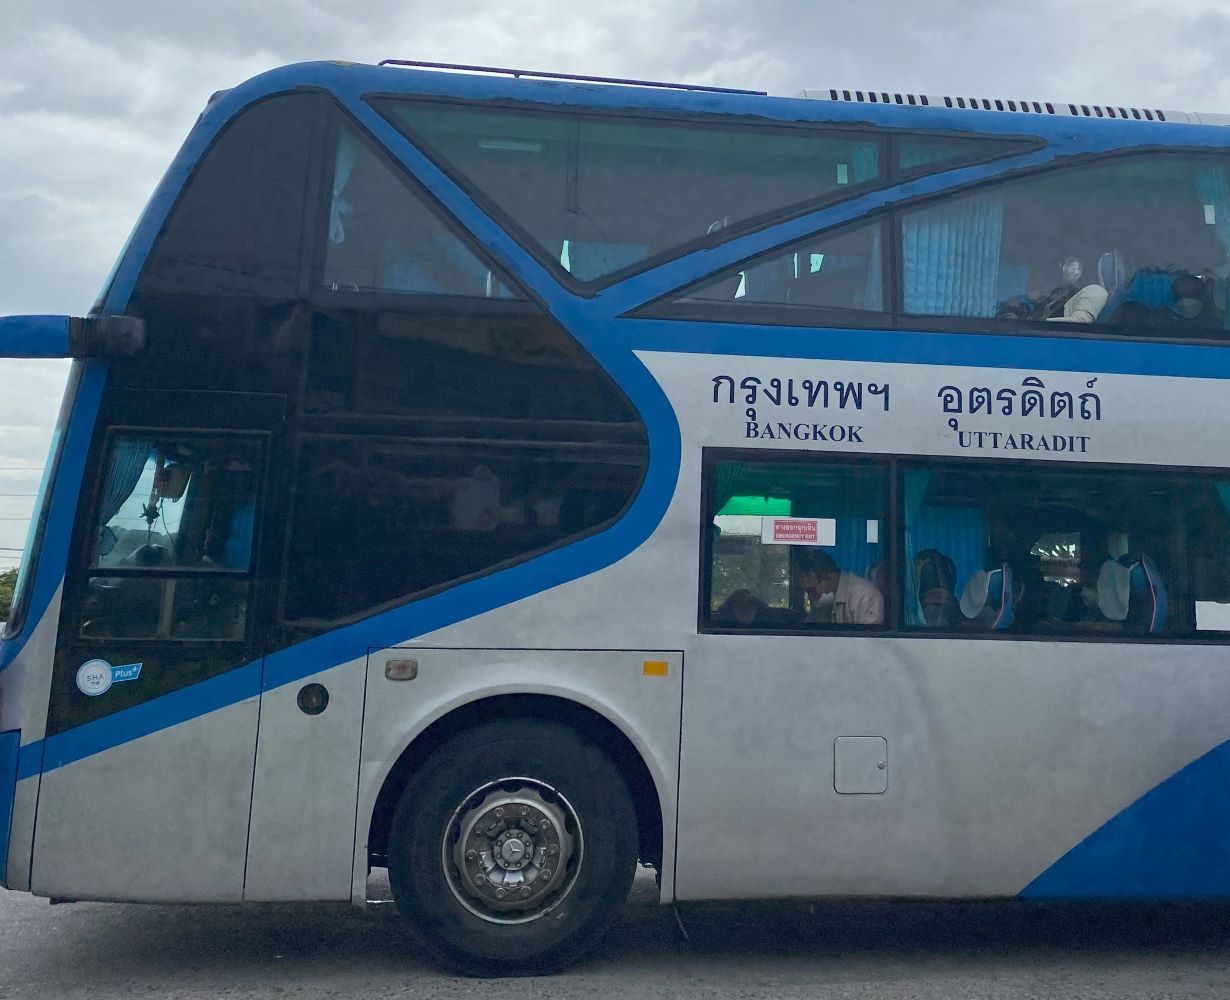 From Ayutthaya to Sukhothai by bus